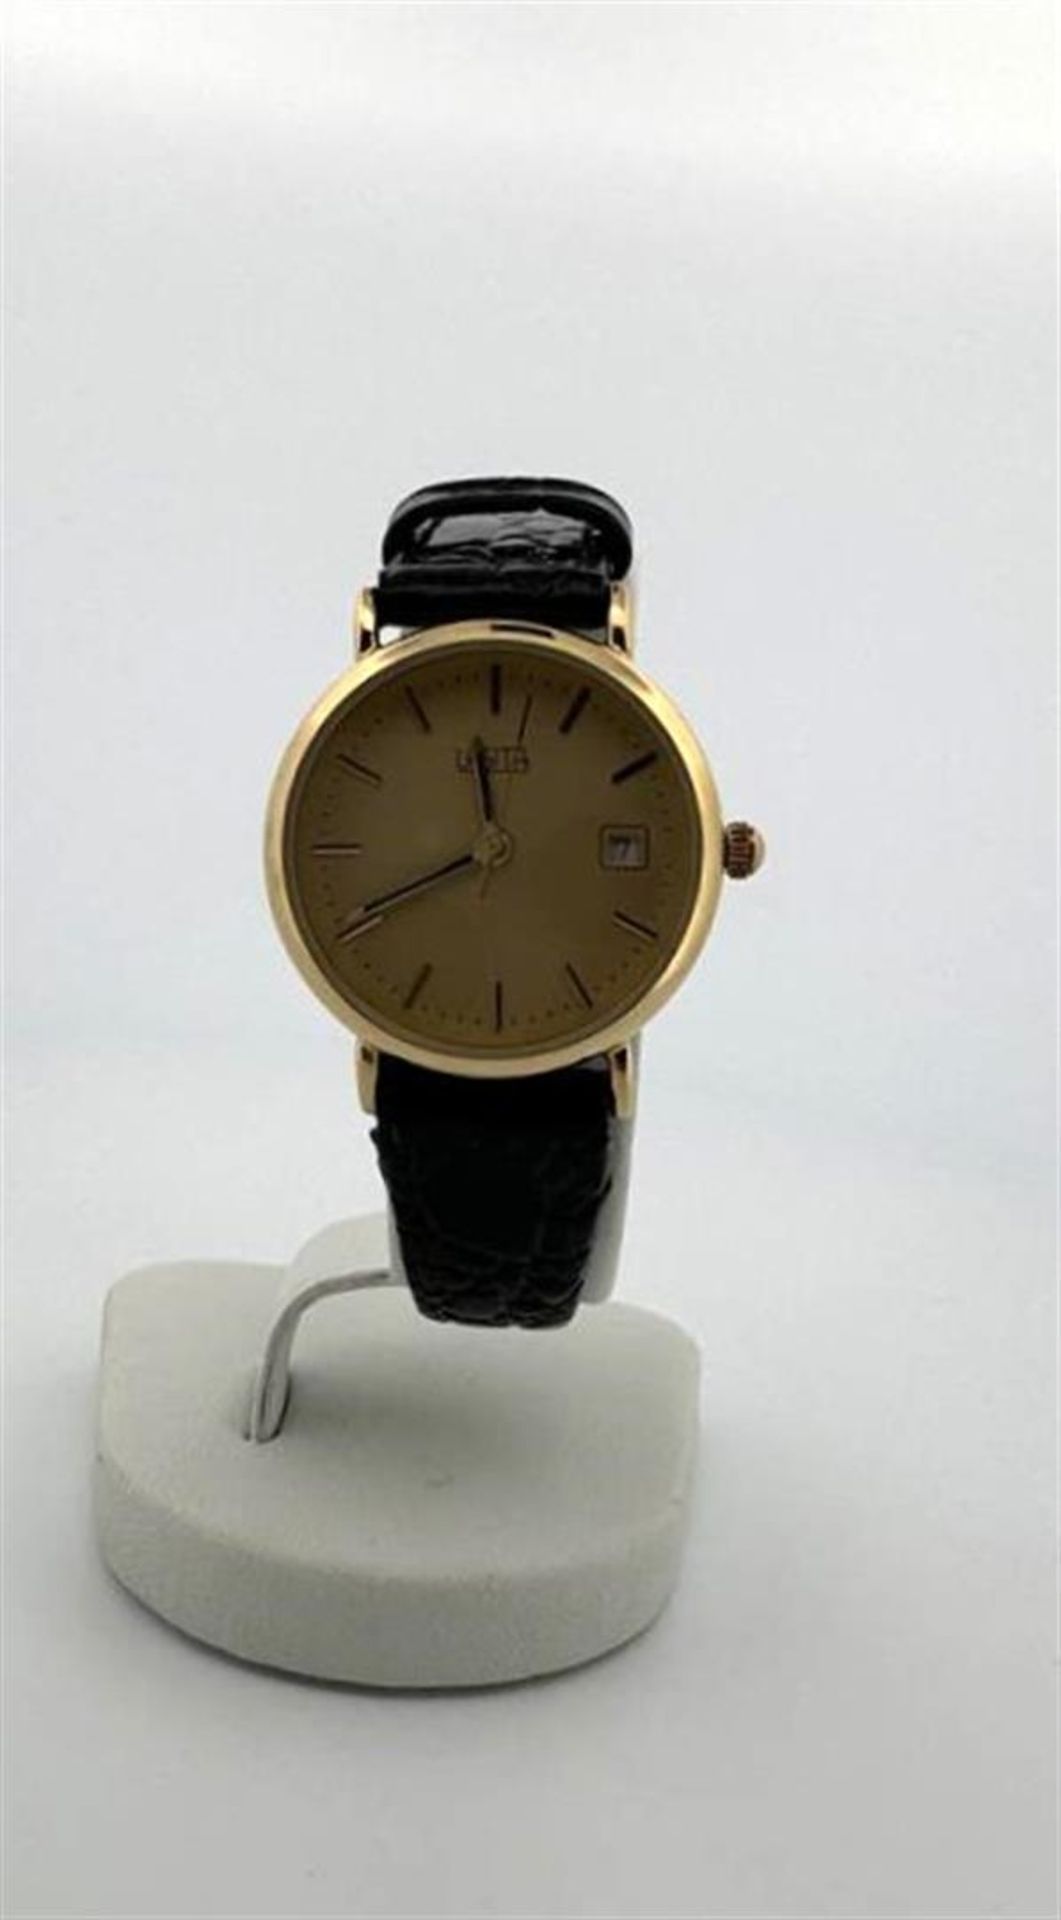 14kt Yellow gold Lasita women's watch with champagne-colored dial.
Number indication: dashes and dat